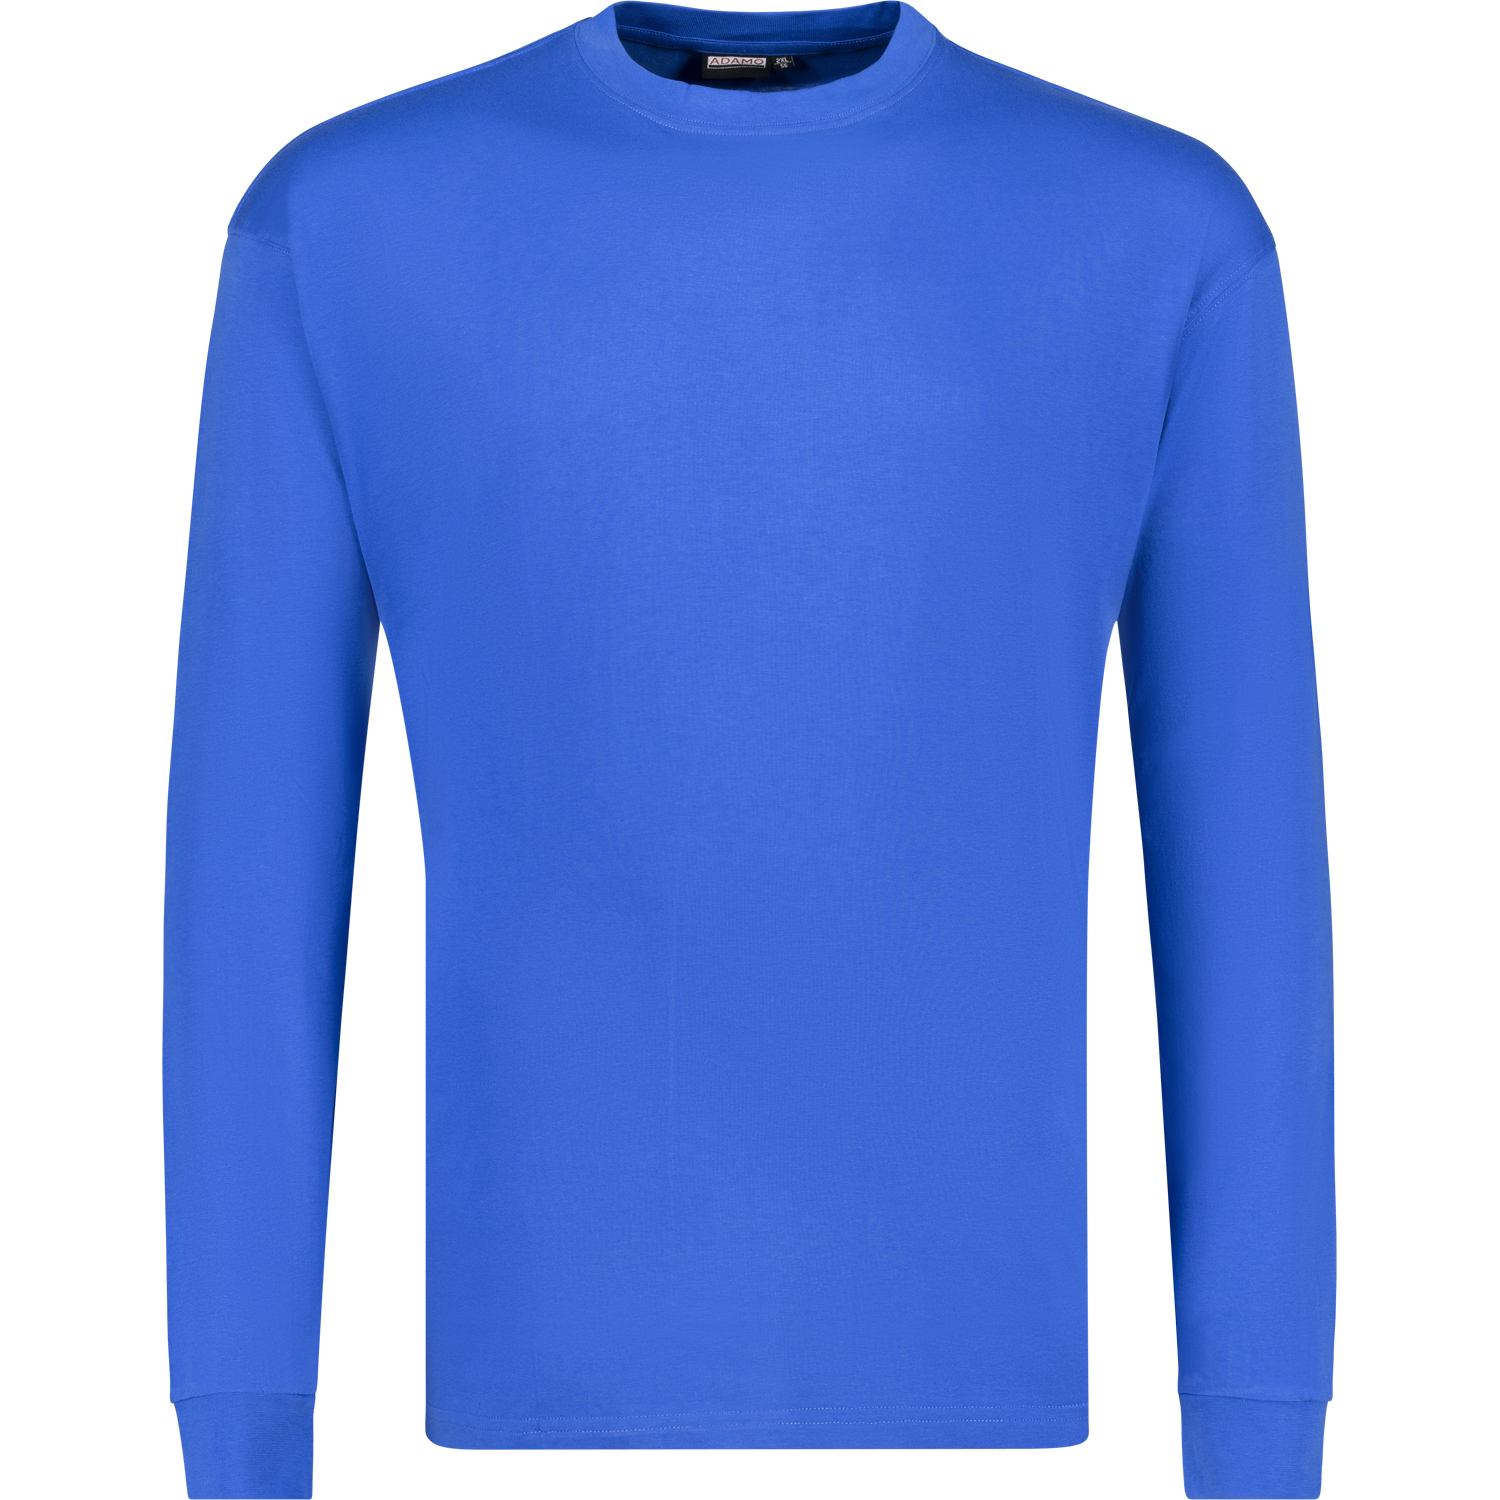 ADAMO longsleeve COMFORT FIT for men in royal blue with round neck up to size 12XL